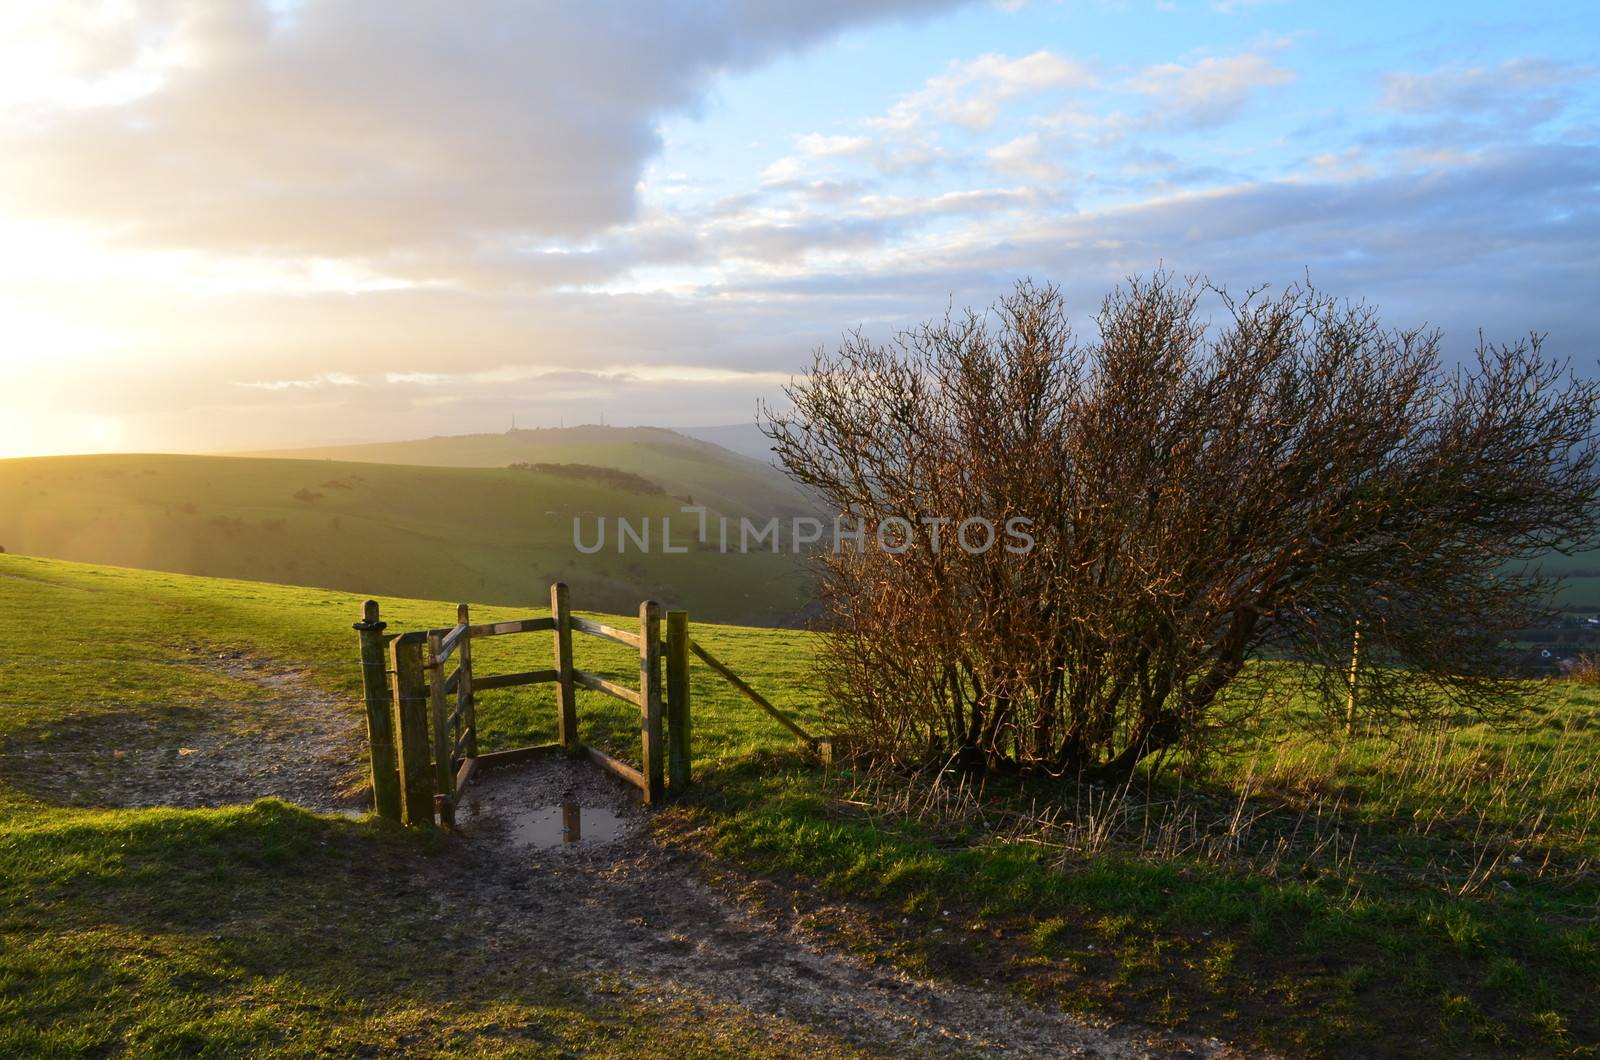 Countryside path with gate leading onto open rolling countryside in Sussex,England. Image taken at sunset at Devils Dyke.